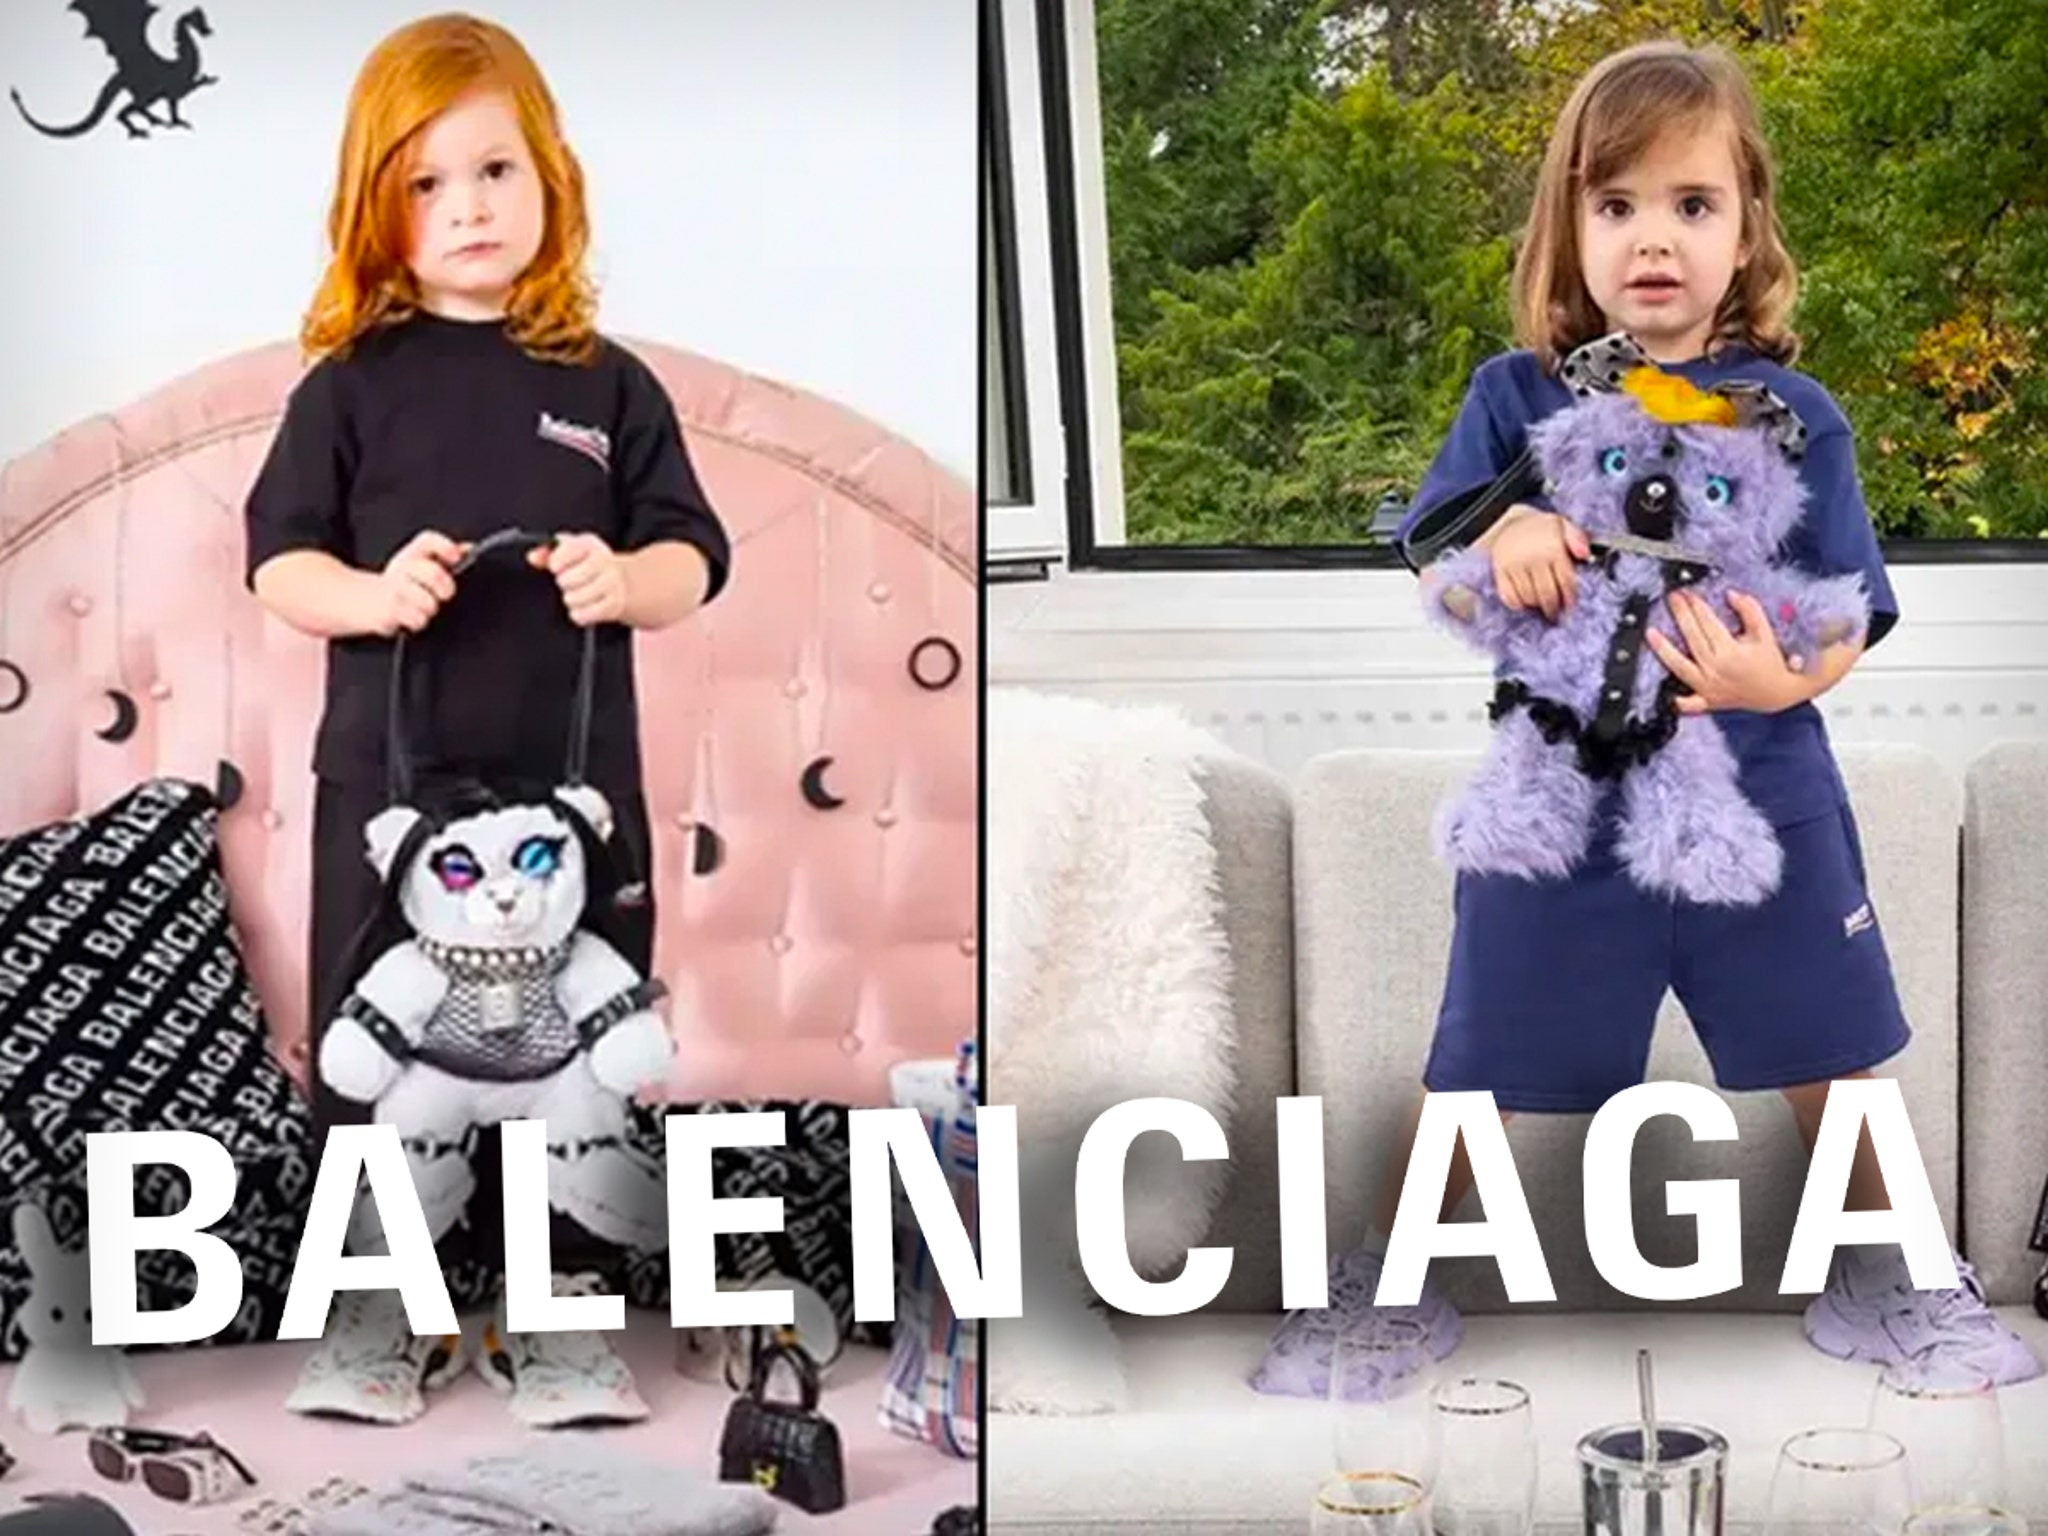 Balenciaga attacks marketing agency to stave off mistakes sources claim   US Today News